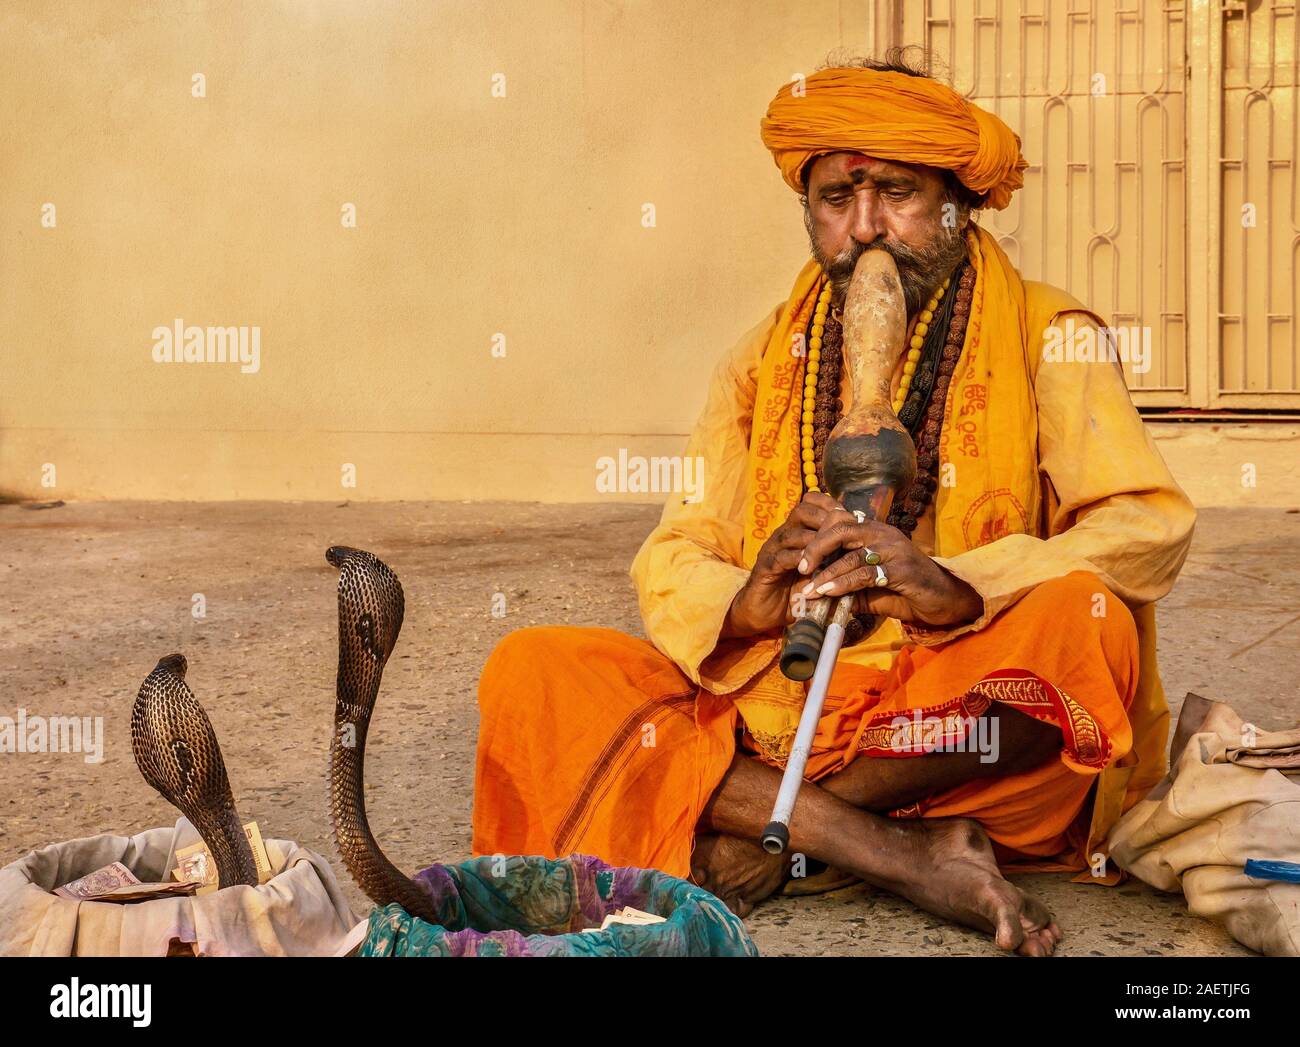 An Indian snake charmer is playing a traditional musical instrument called a pungi, hypnotizing two king cobra snakes in an ancient cultural ritual. Stock Photo